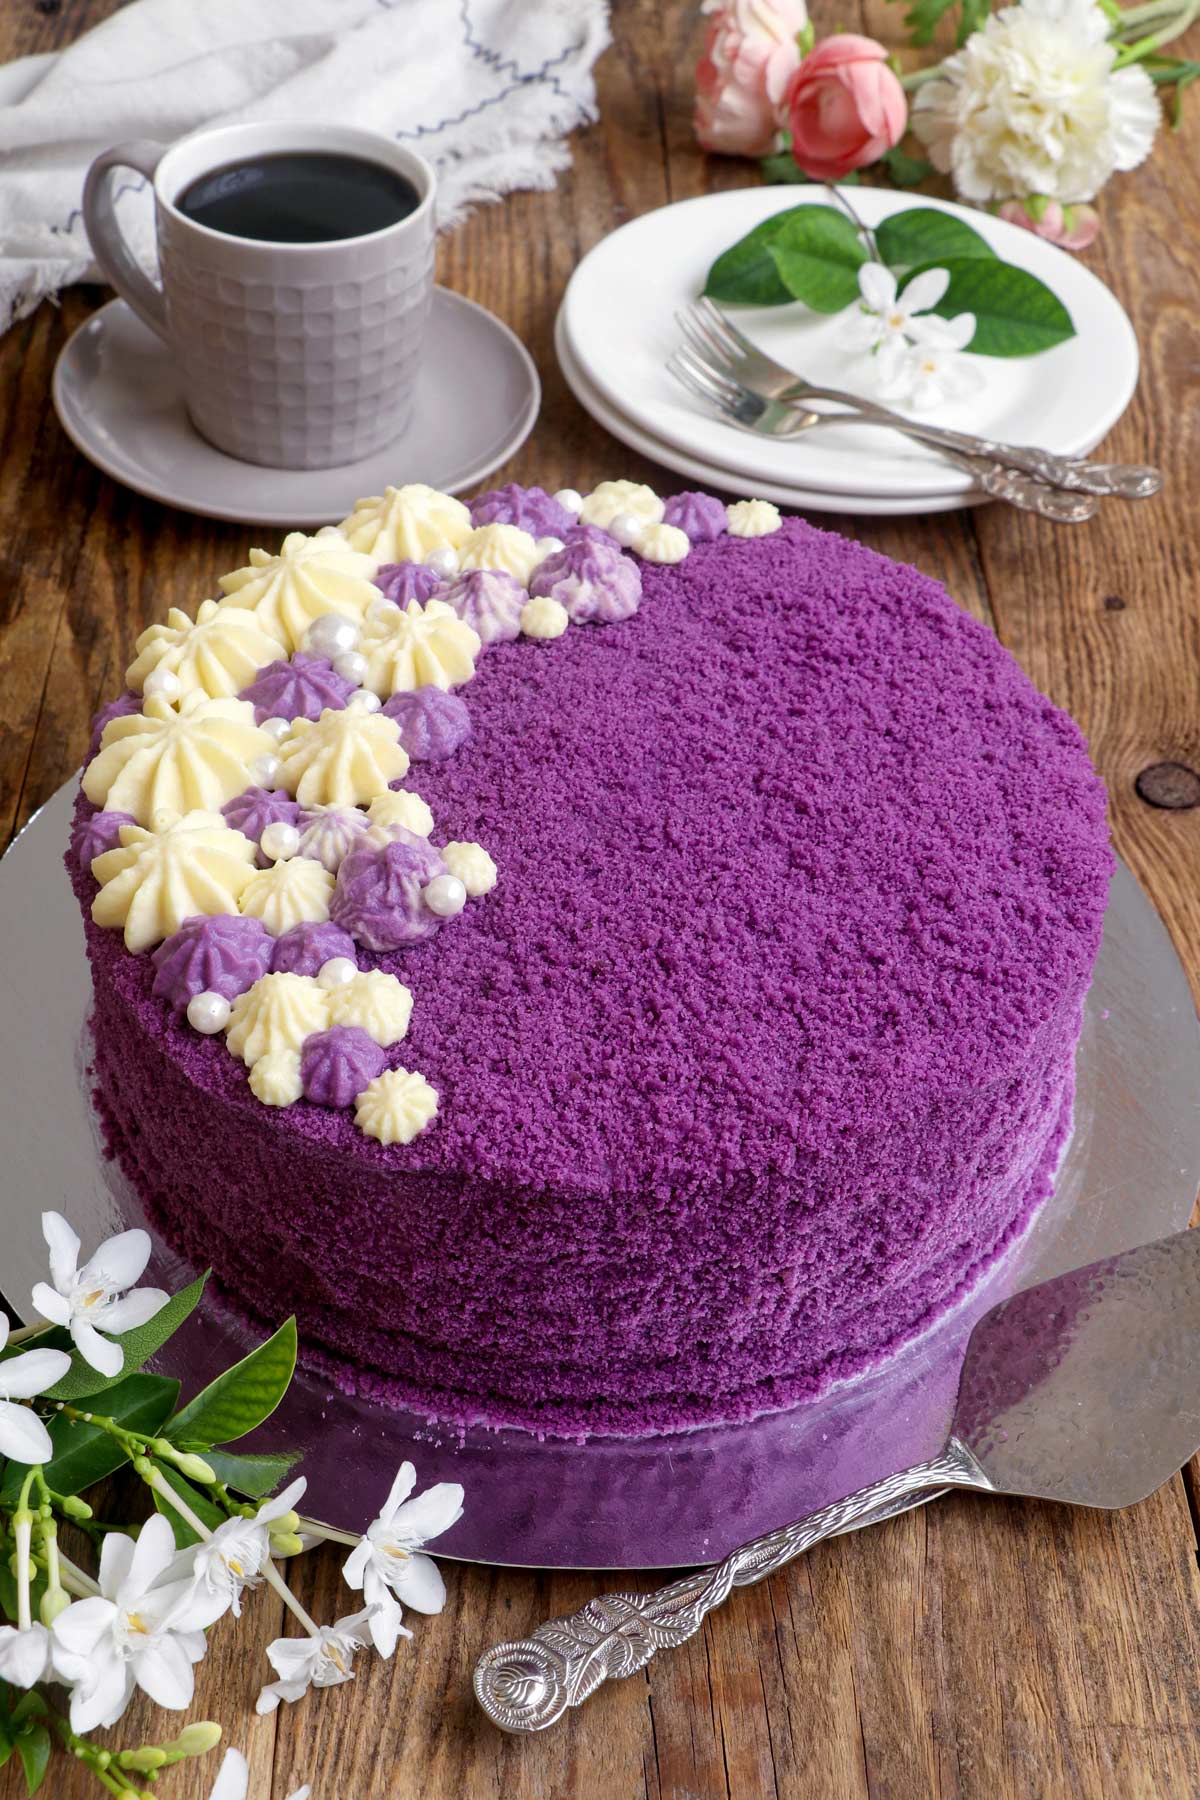 Round Ube Cake flower frostings, with coffee on the side.